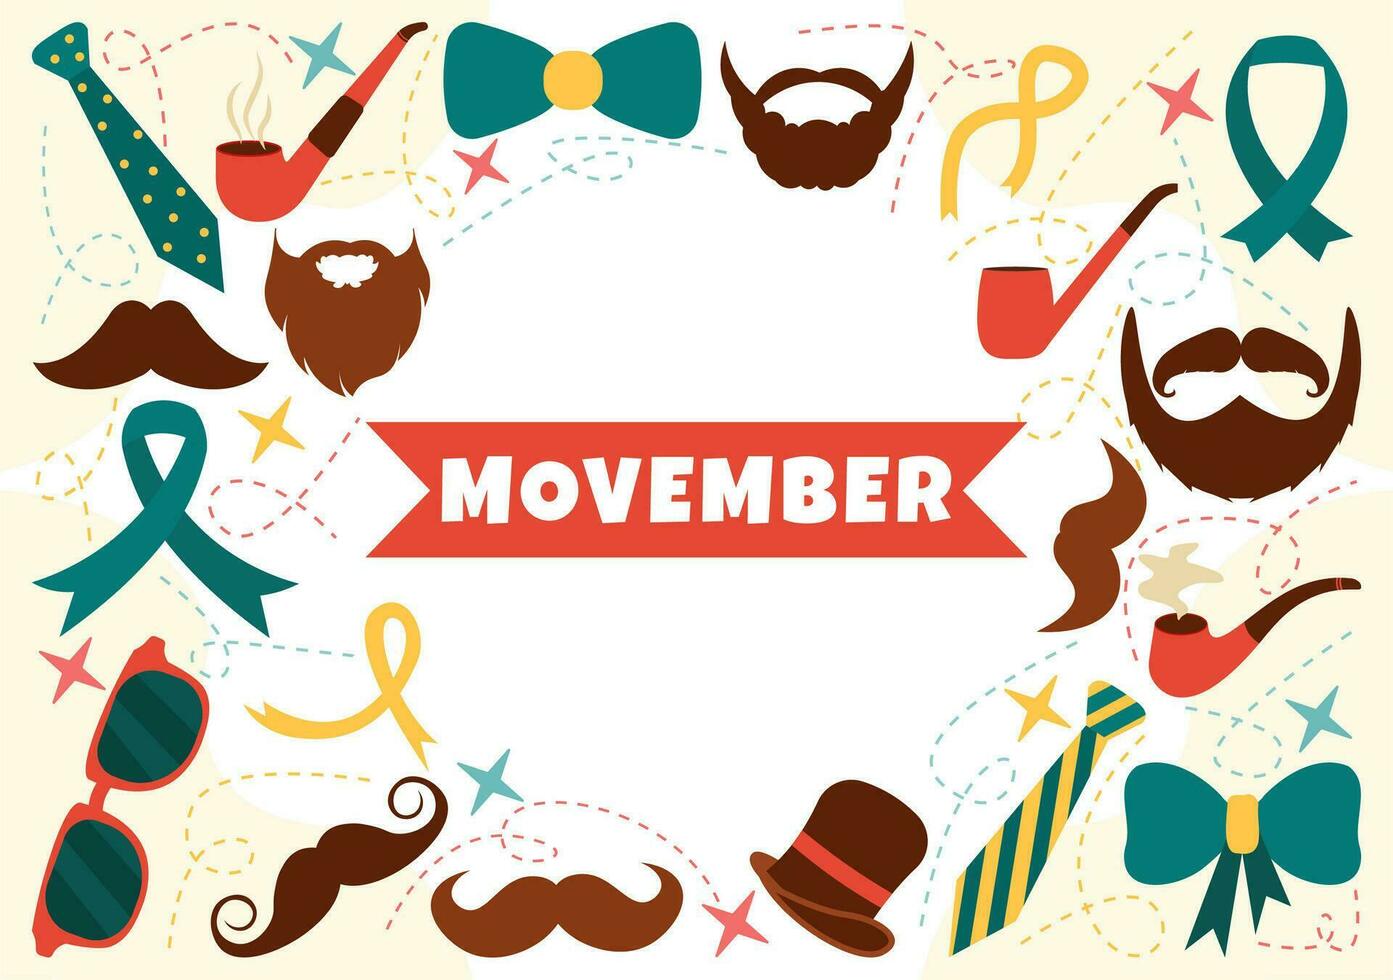 Movember Time Vector Illustration with Mustache and Ribbon for Men's Health Awareness Month in Flat Cartoon Hand Drawn Background Templates